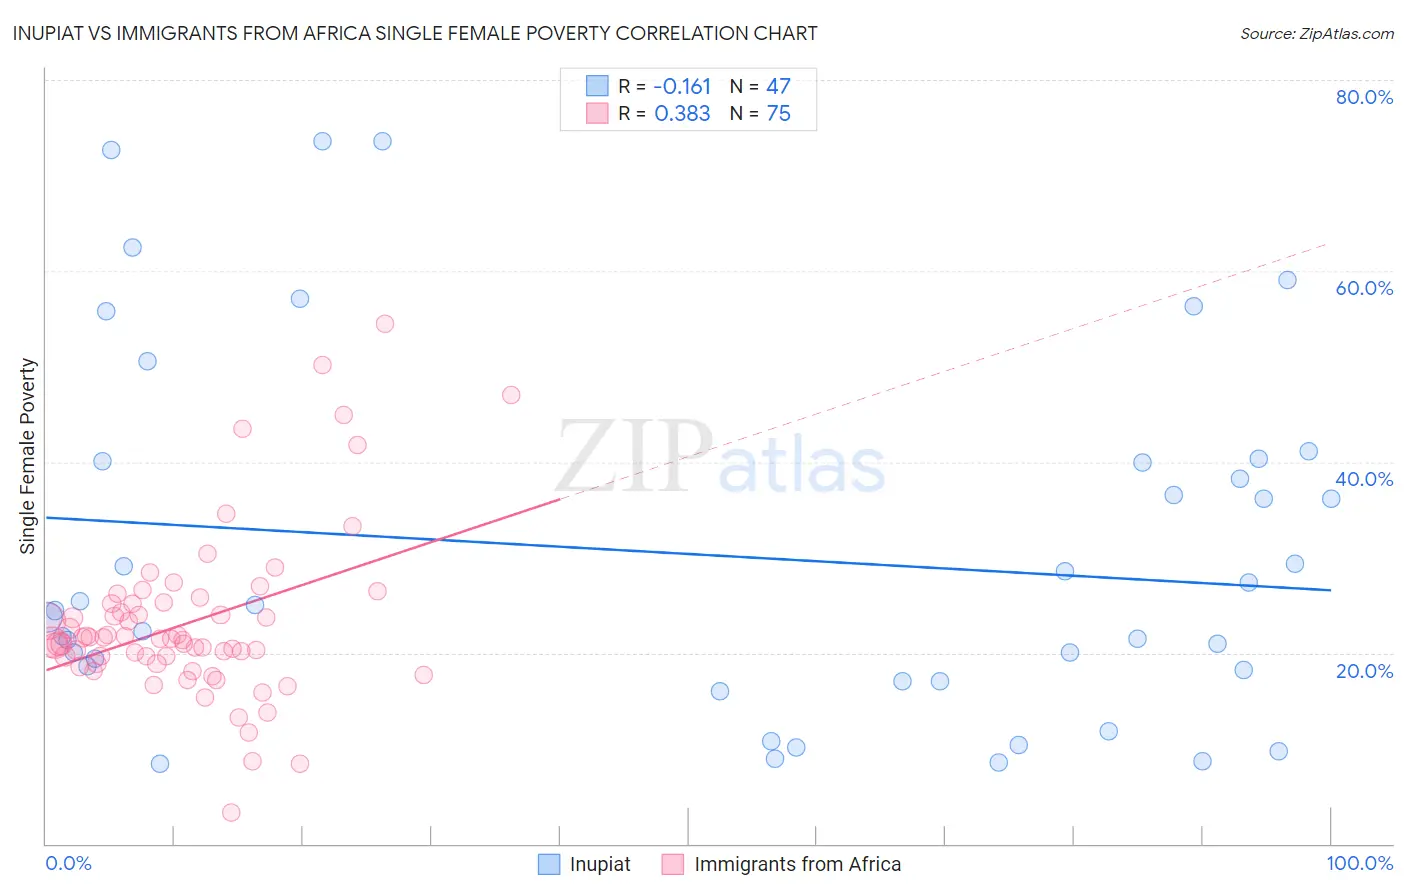 Inupiat vs Immigrants from Africa Single Female Poverty